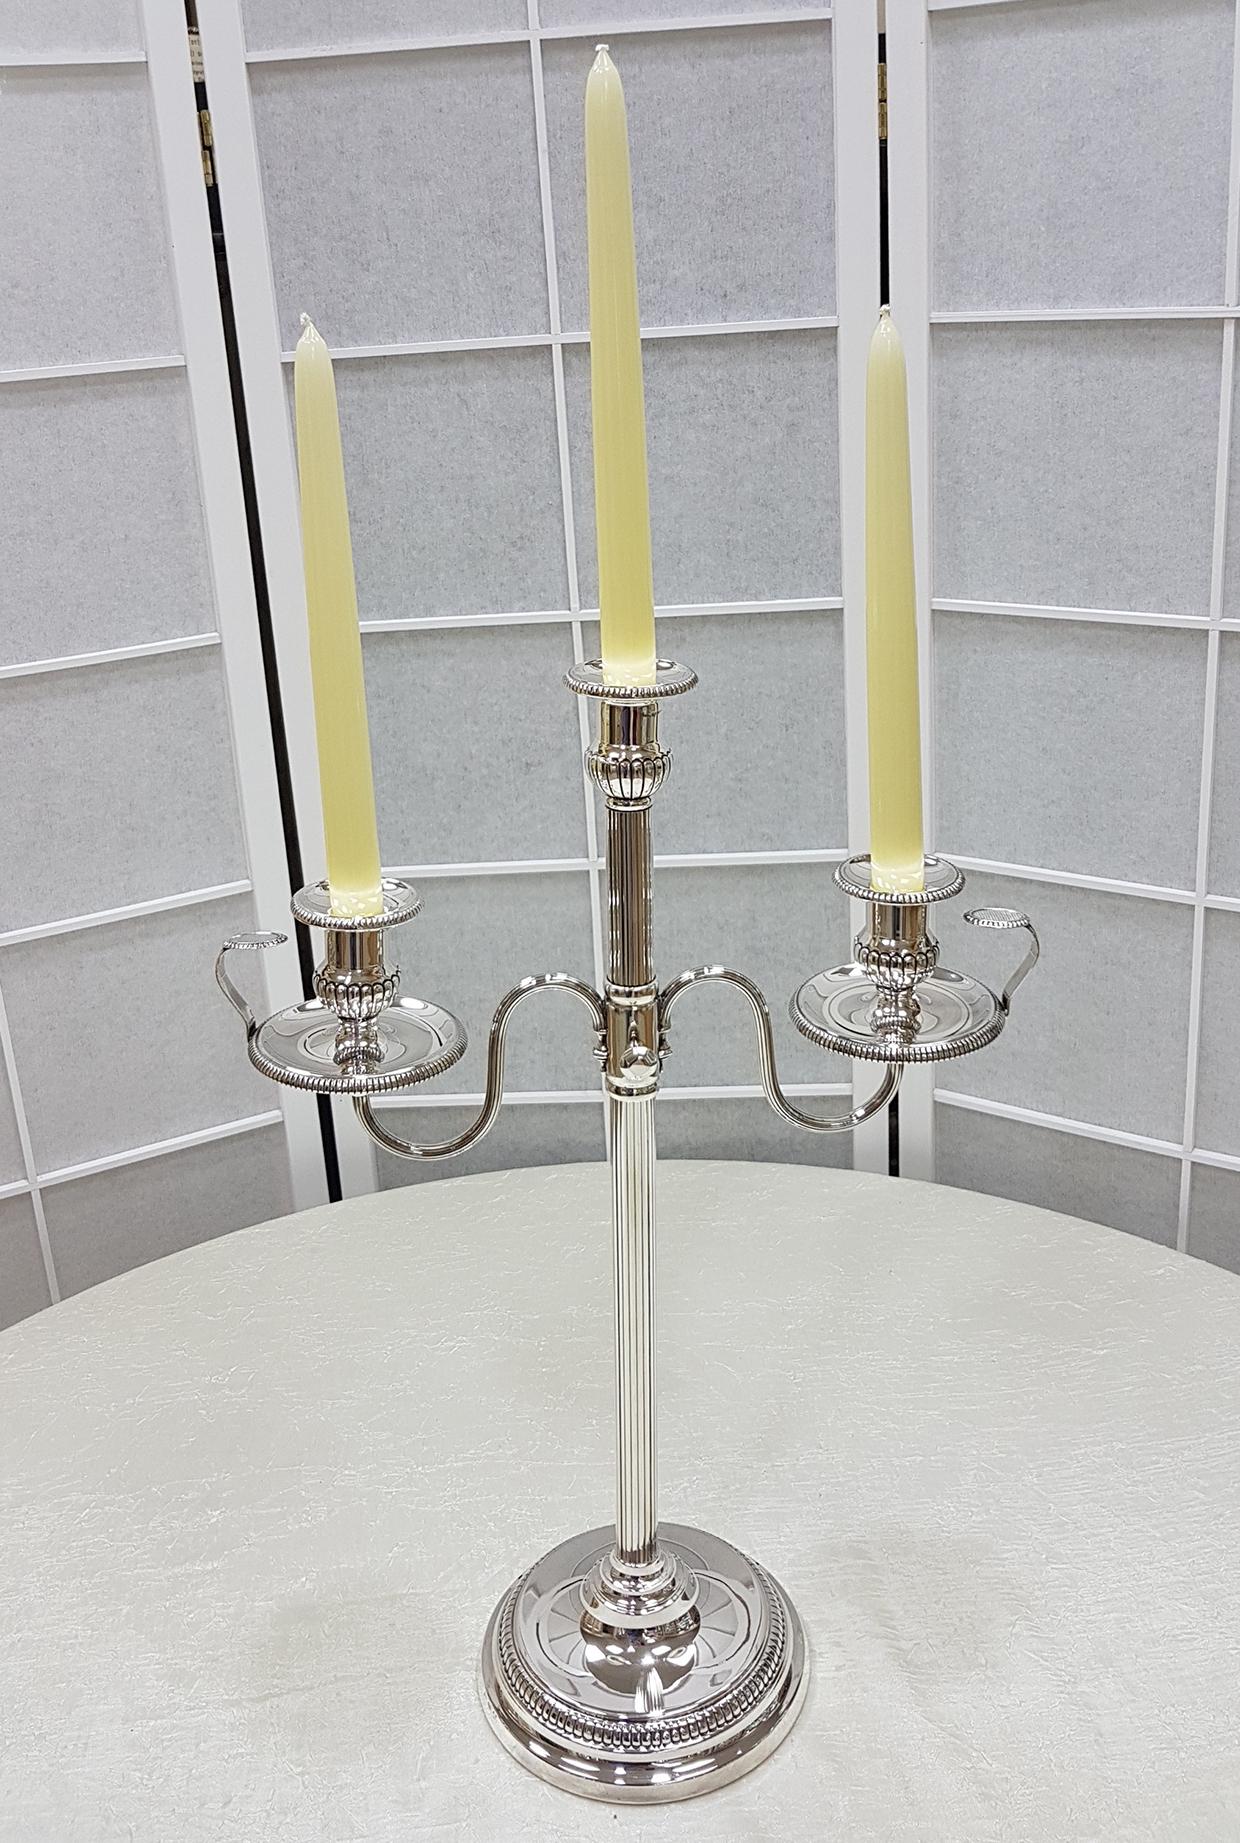 Elegant candelabra in 925 sterling silver with central stem and striped arms.
The two side candle holders are detachable and become two chambers ticks cm. 11 H. 5.5 .
The 